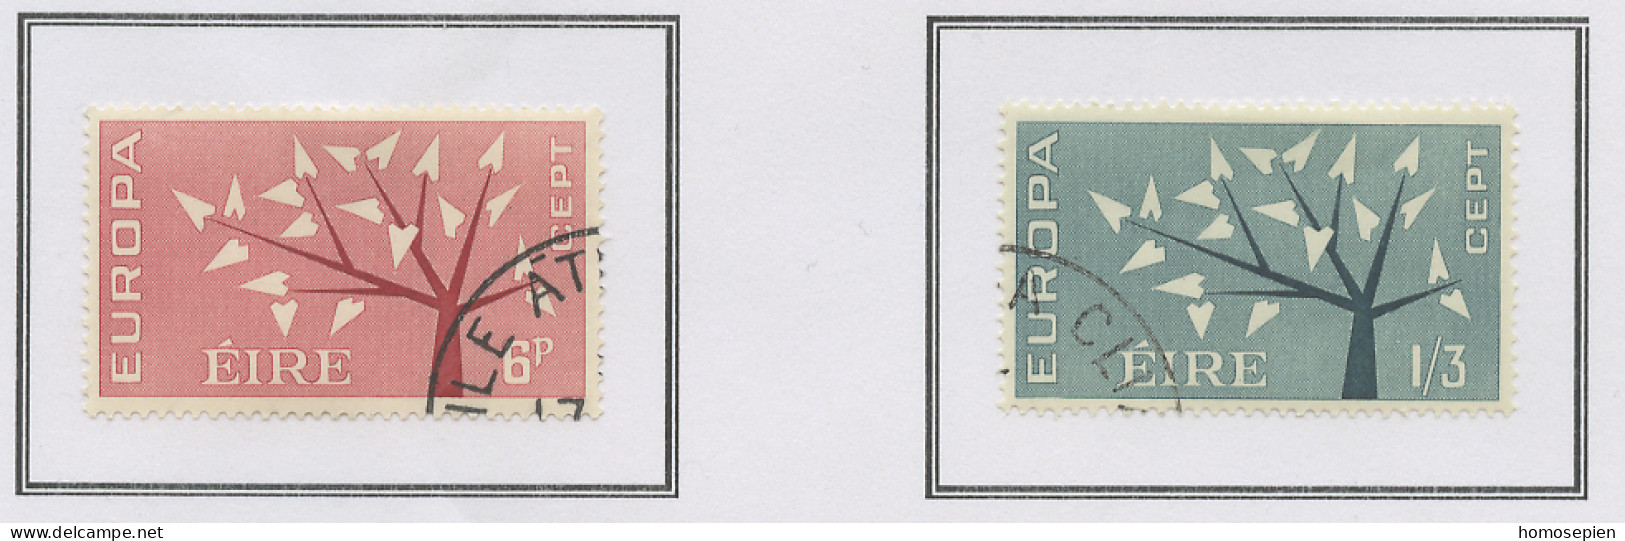 Irlande - Ireland - Irland 1962 Y&T N°155 à 156 - Michel N°155 à 156 (o) - EUROPA - Used Stamps